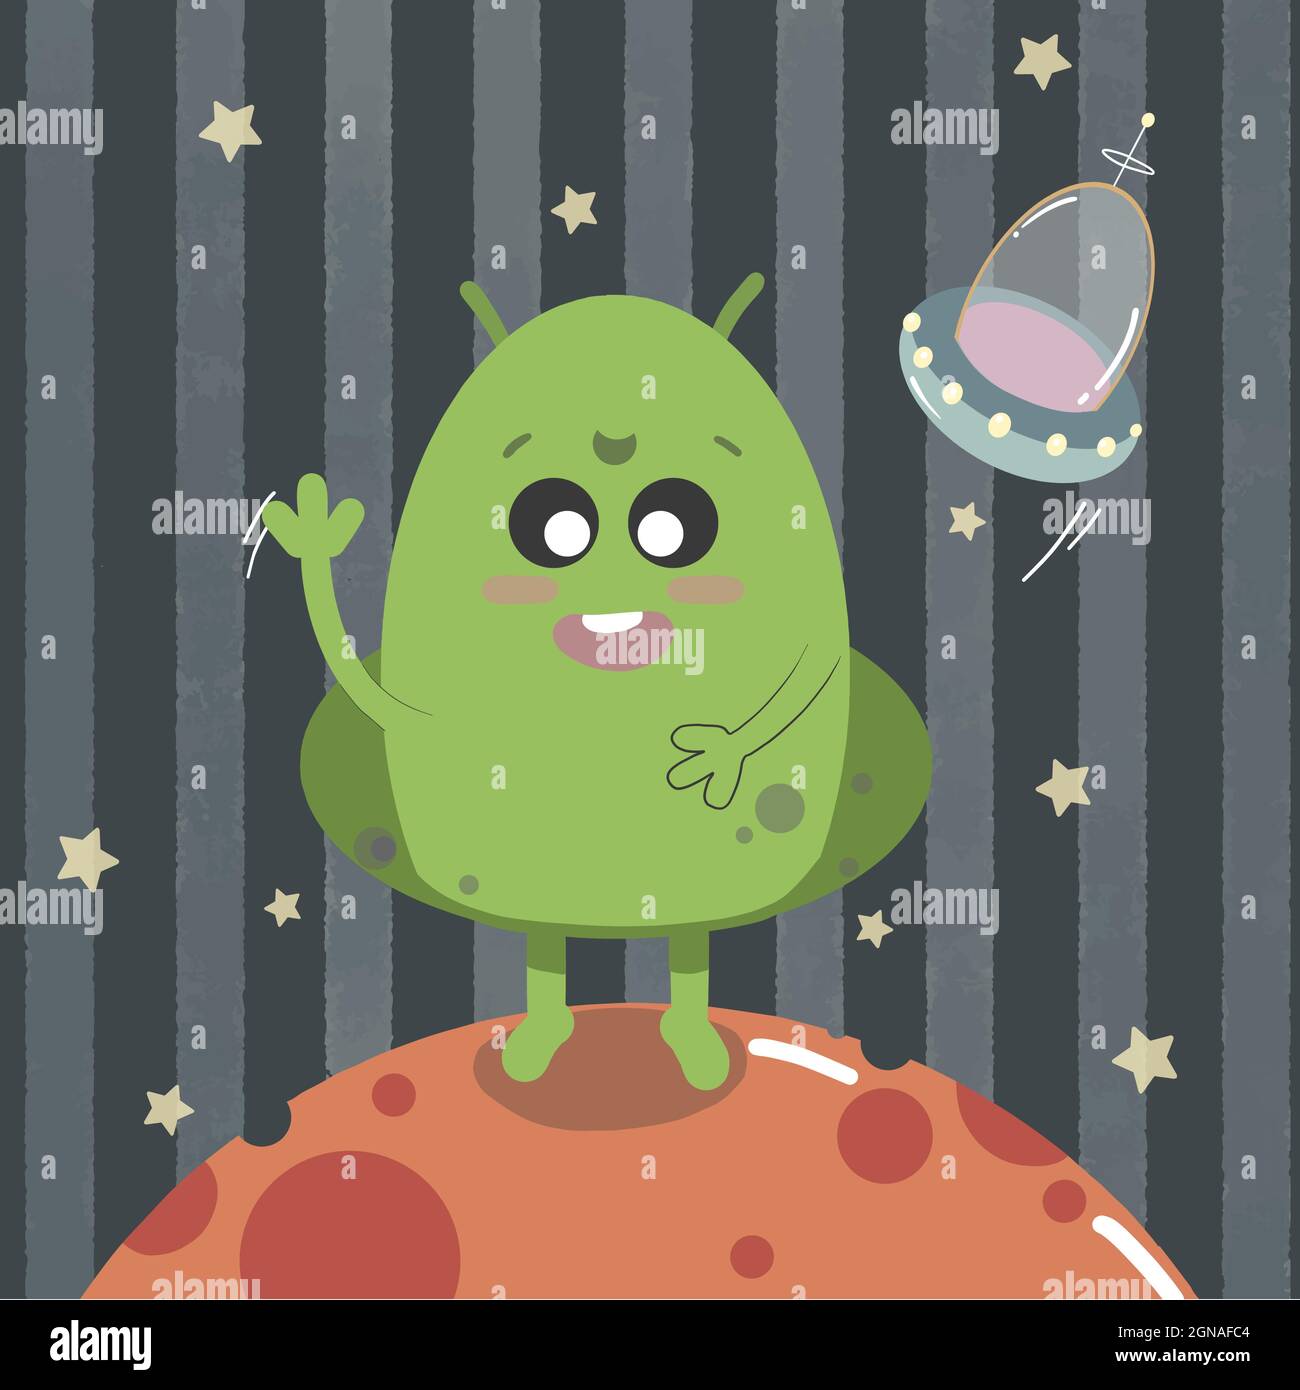 Cute space alien, happy friendly monster with ufo. Kawaii style Martian in space. Vector illustration isolated on dark background. Stock Vector